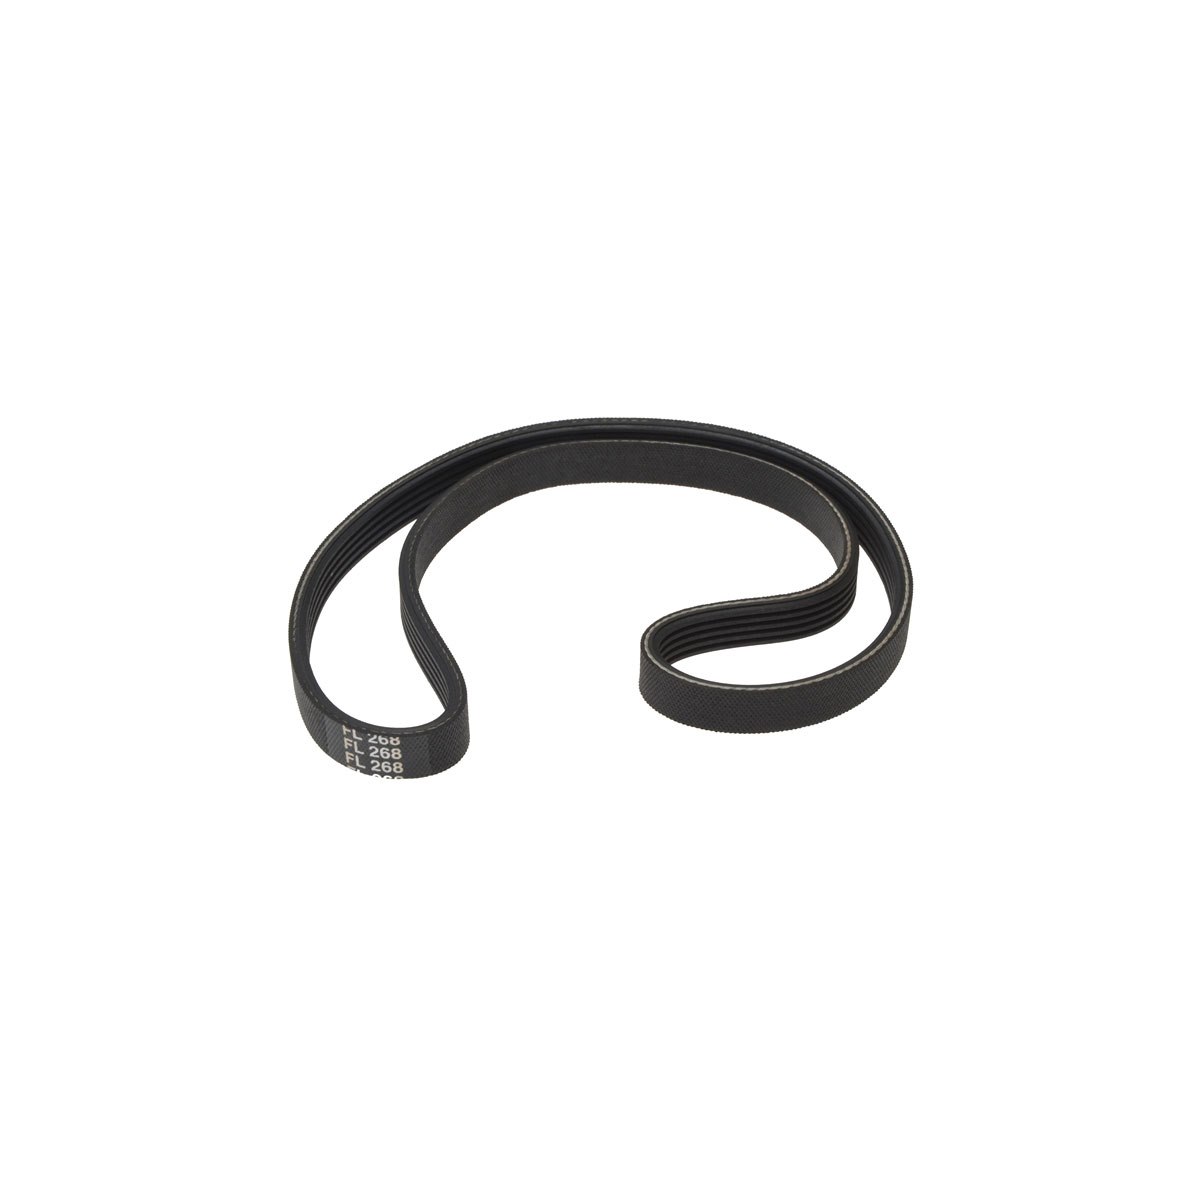 ALM FL268 Drive Belt To Fit Flymo Lawnmowers